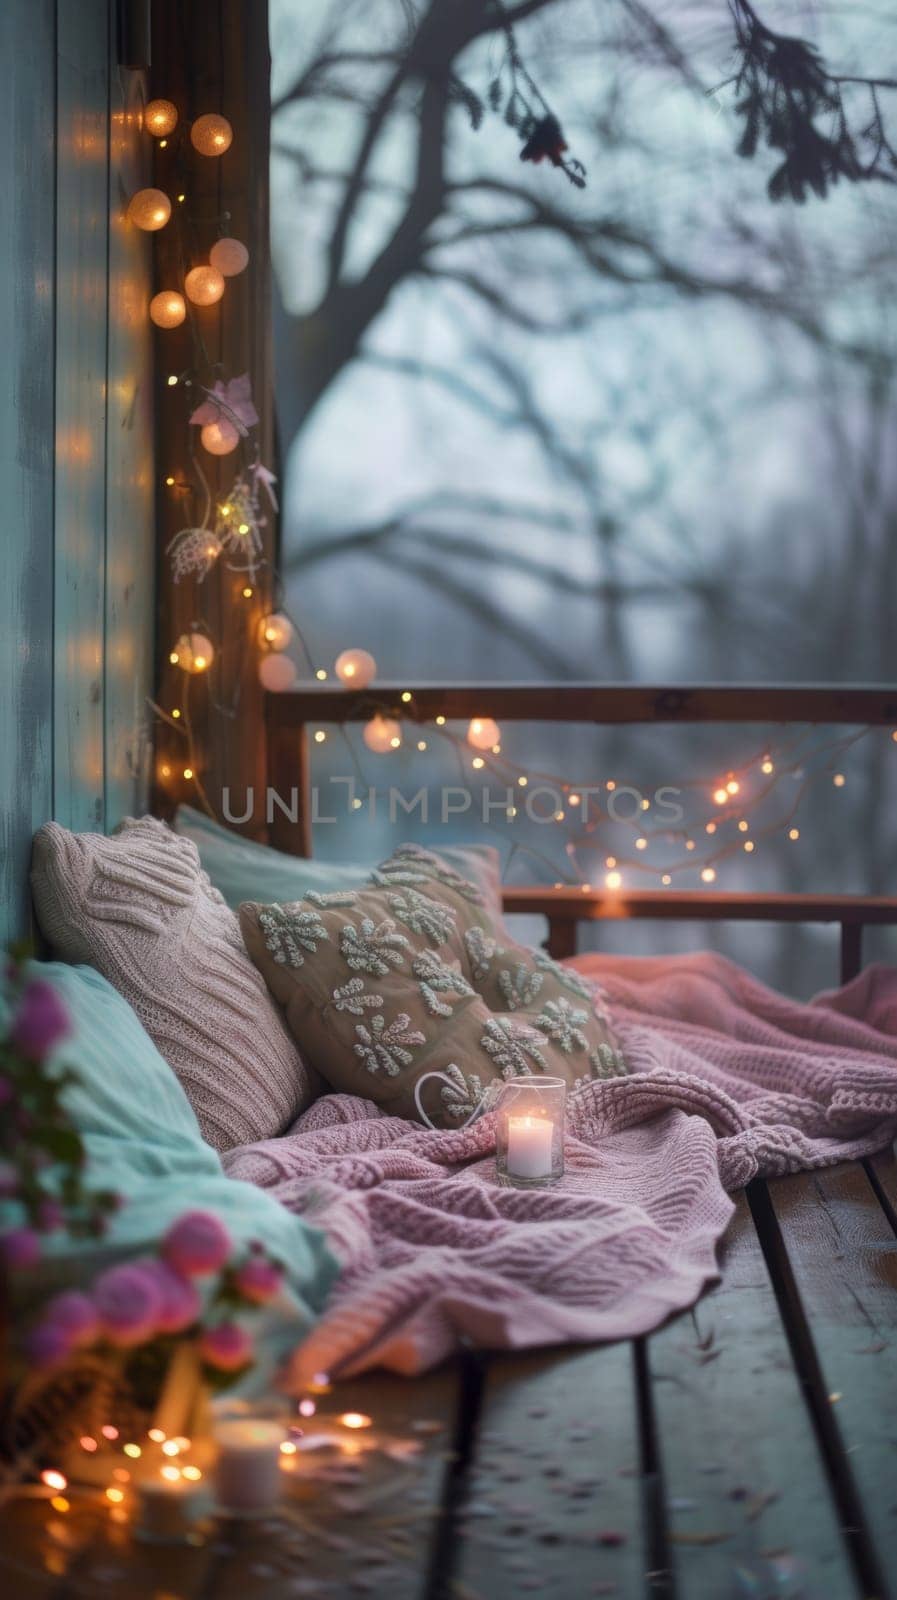 A bed with pillows and blankets on a porch covered in lights